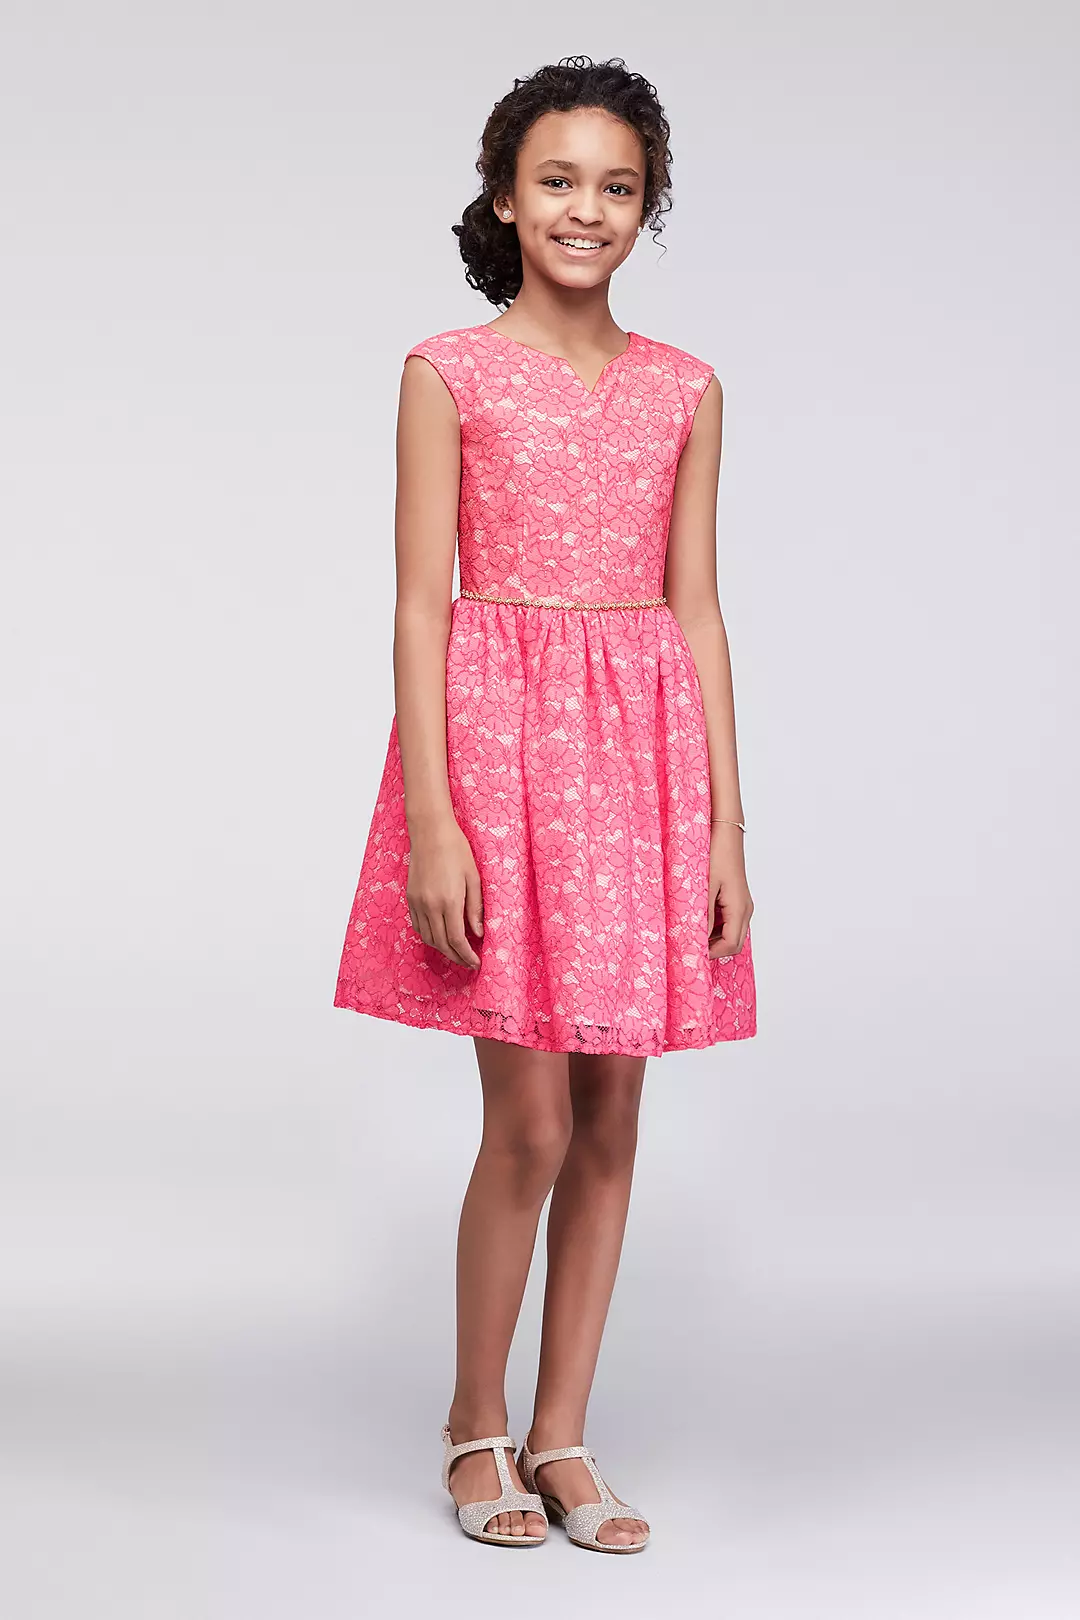 Lace Girls Dress with Beaded Belt Image